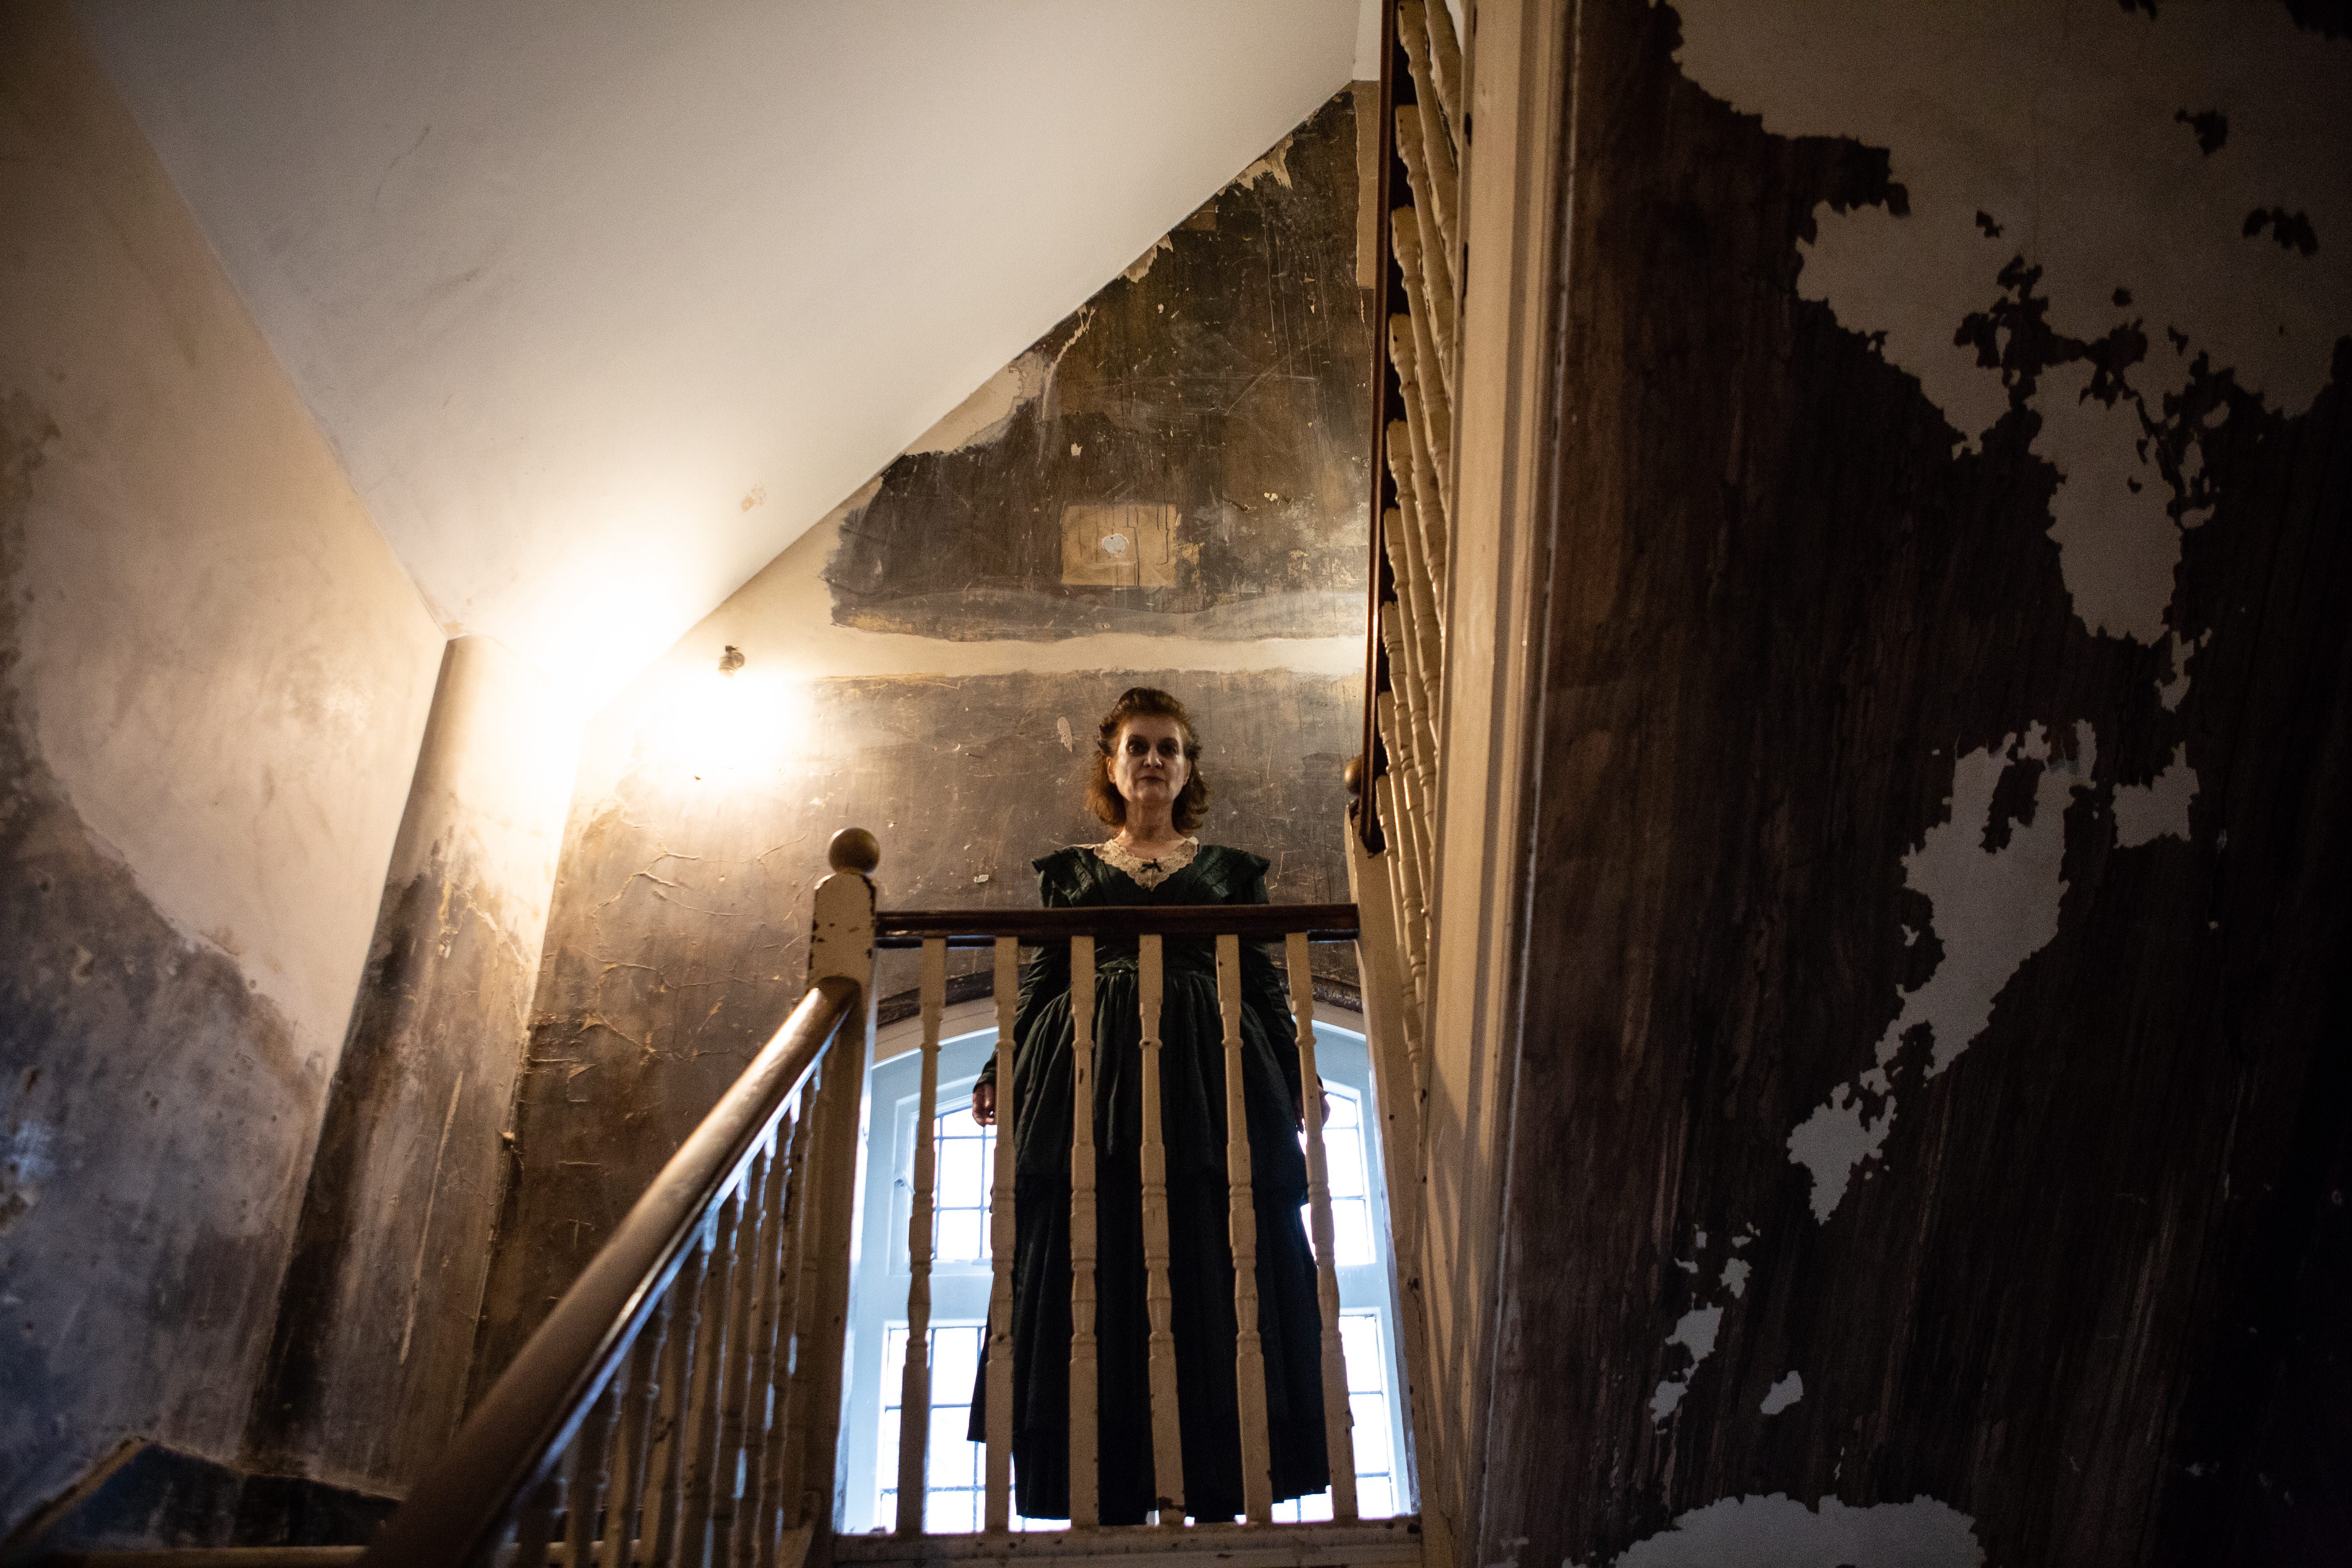 A lady with ghostly makeup in a black dress, poised and standing on a flight of stairs.